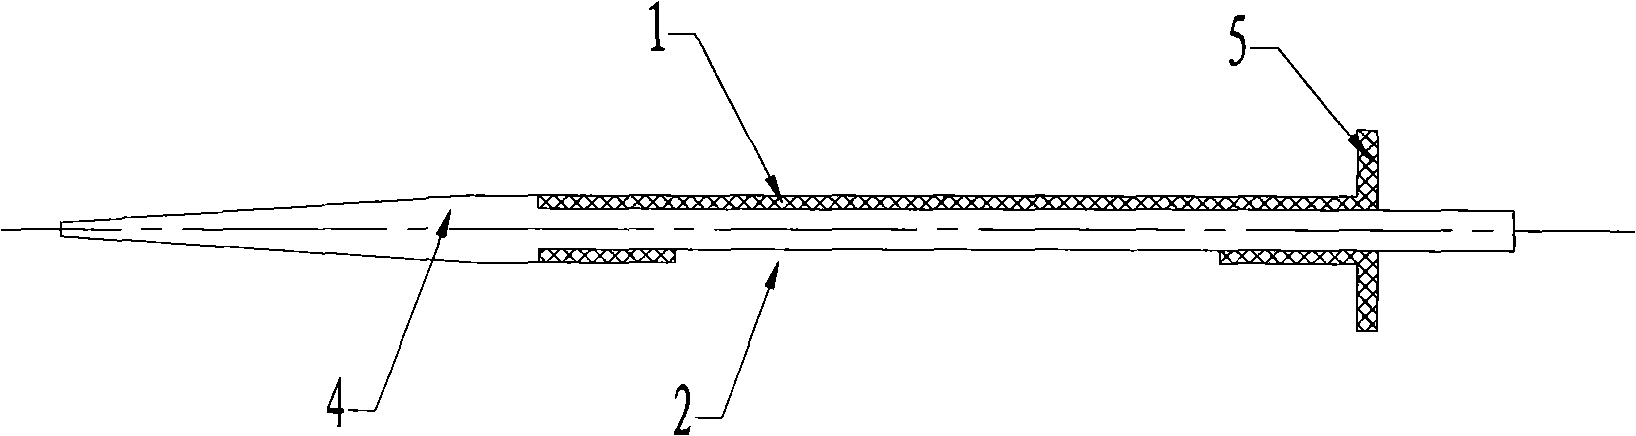 Operation supporting sleeve and puncture guiding needle capable of being used by combination